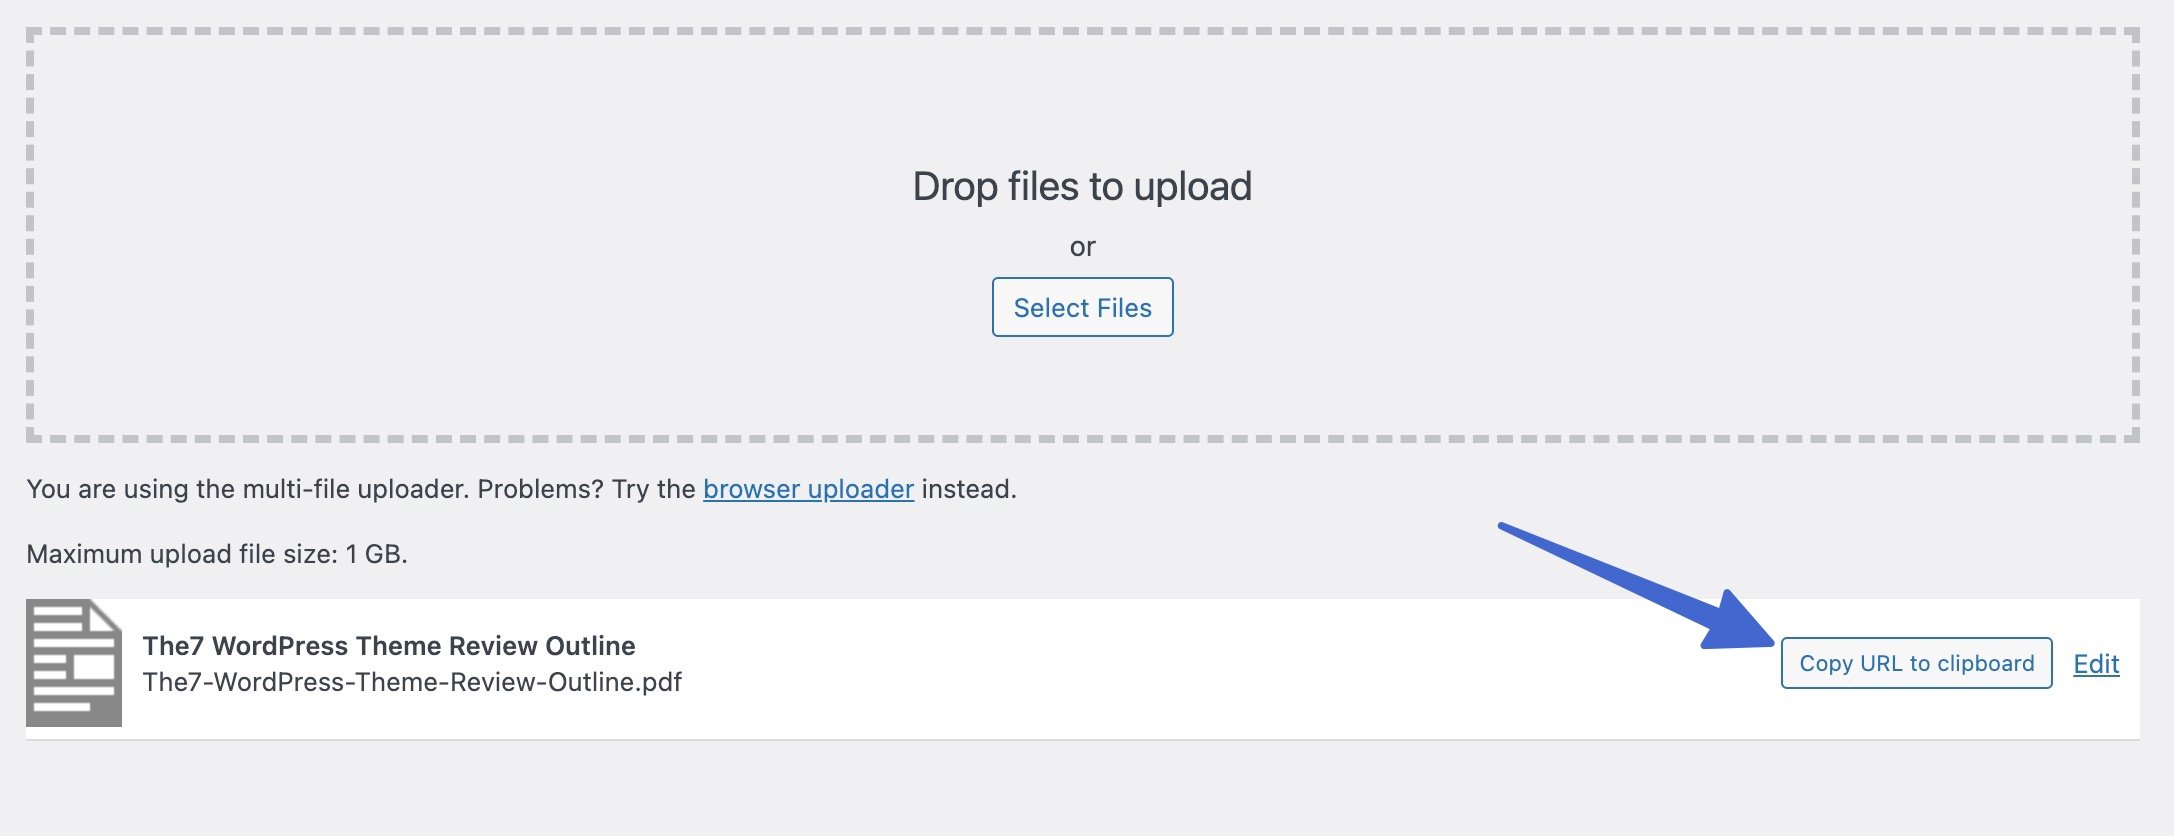 copy URL to clipboard to add downloadable files in WordPress.